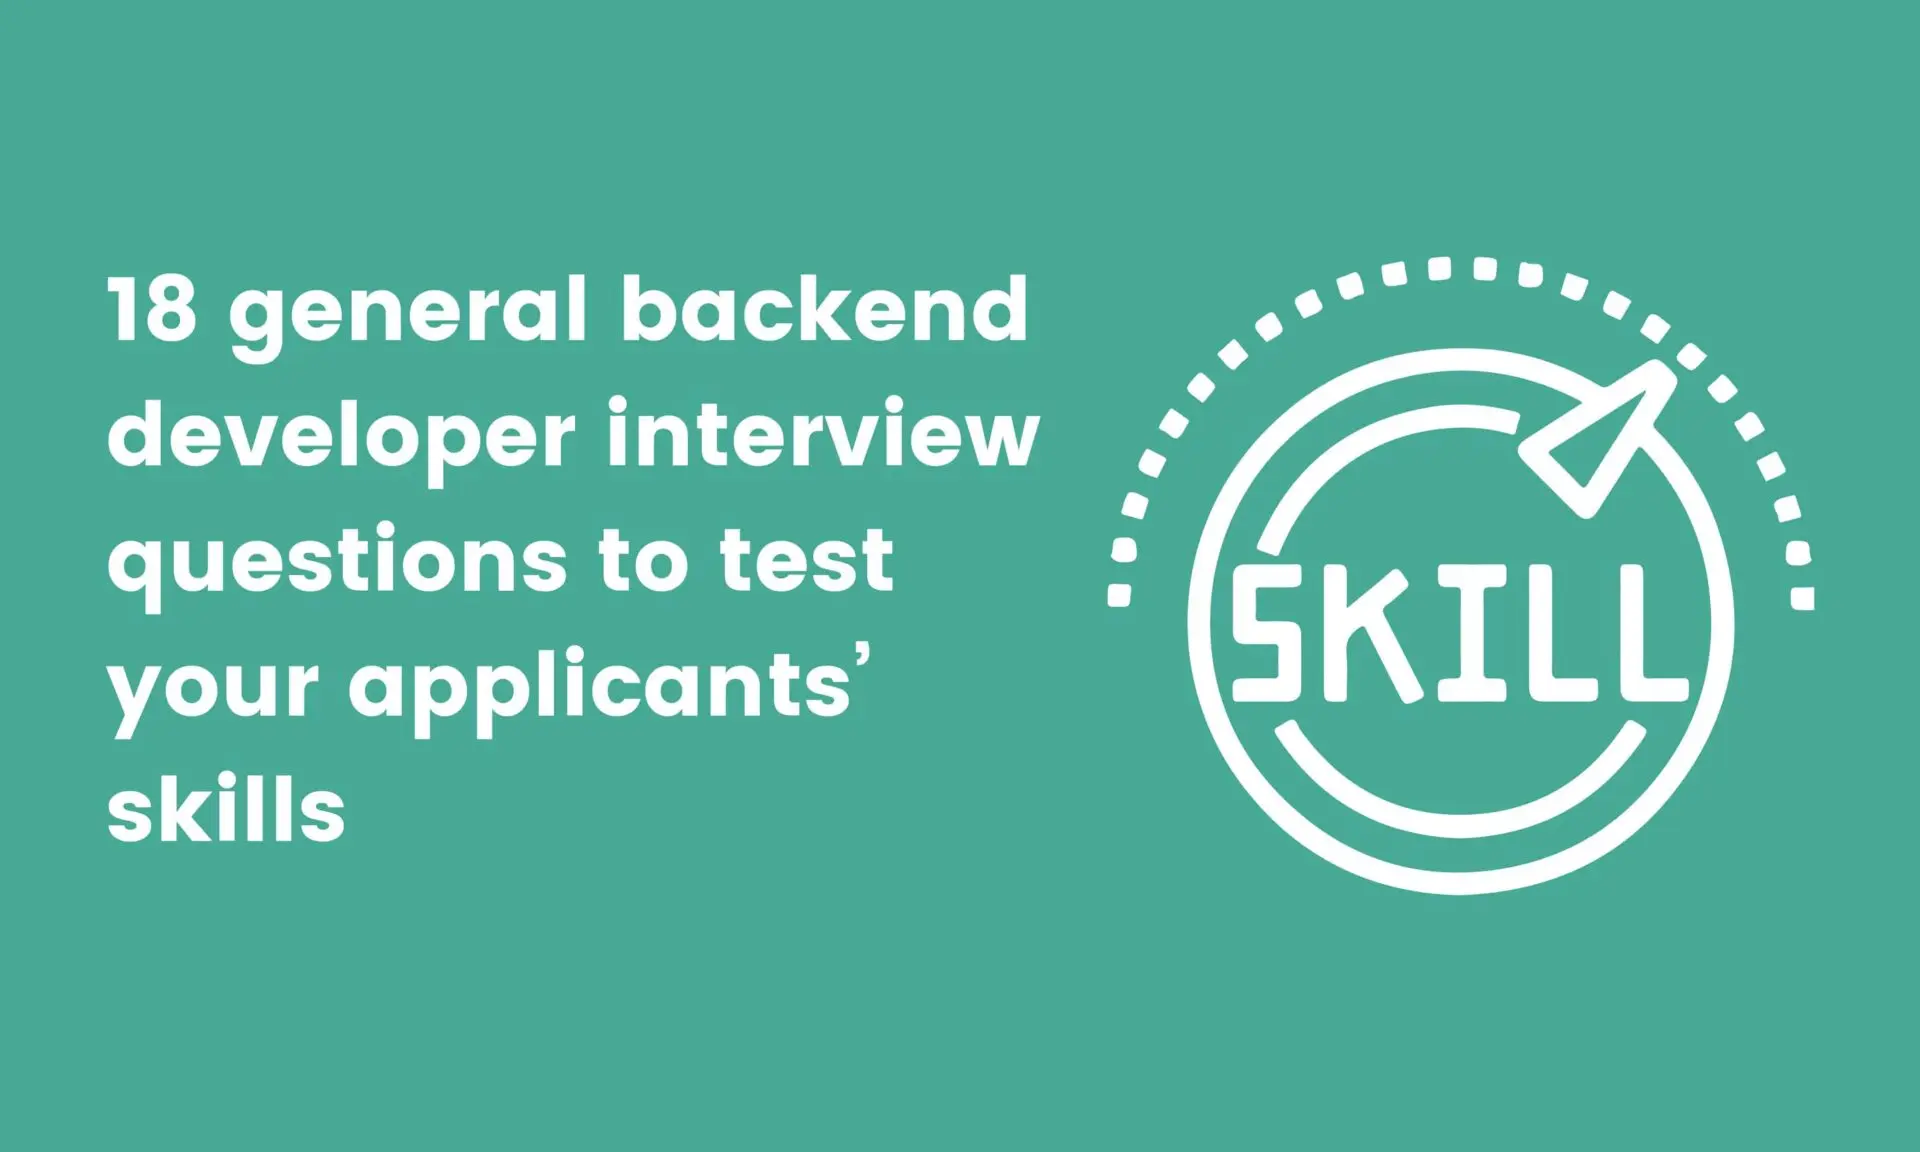 18 general backend developer interview questions to test your applicants’ skills 